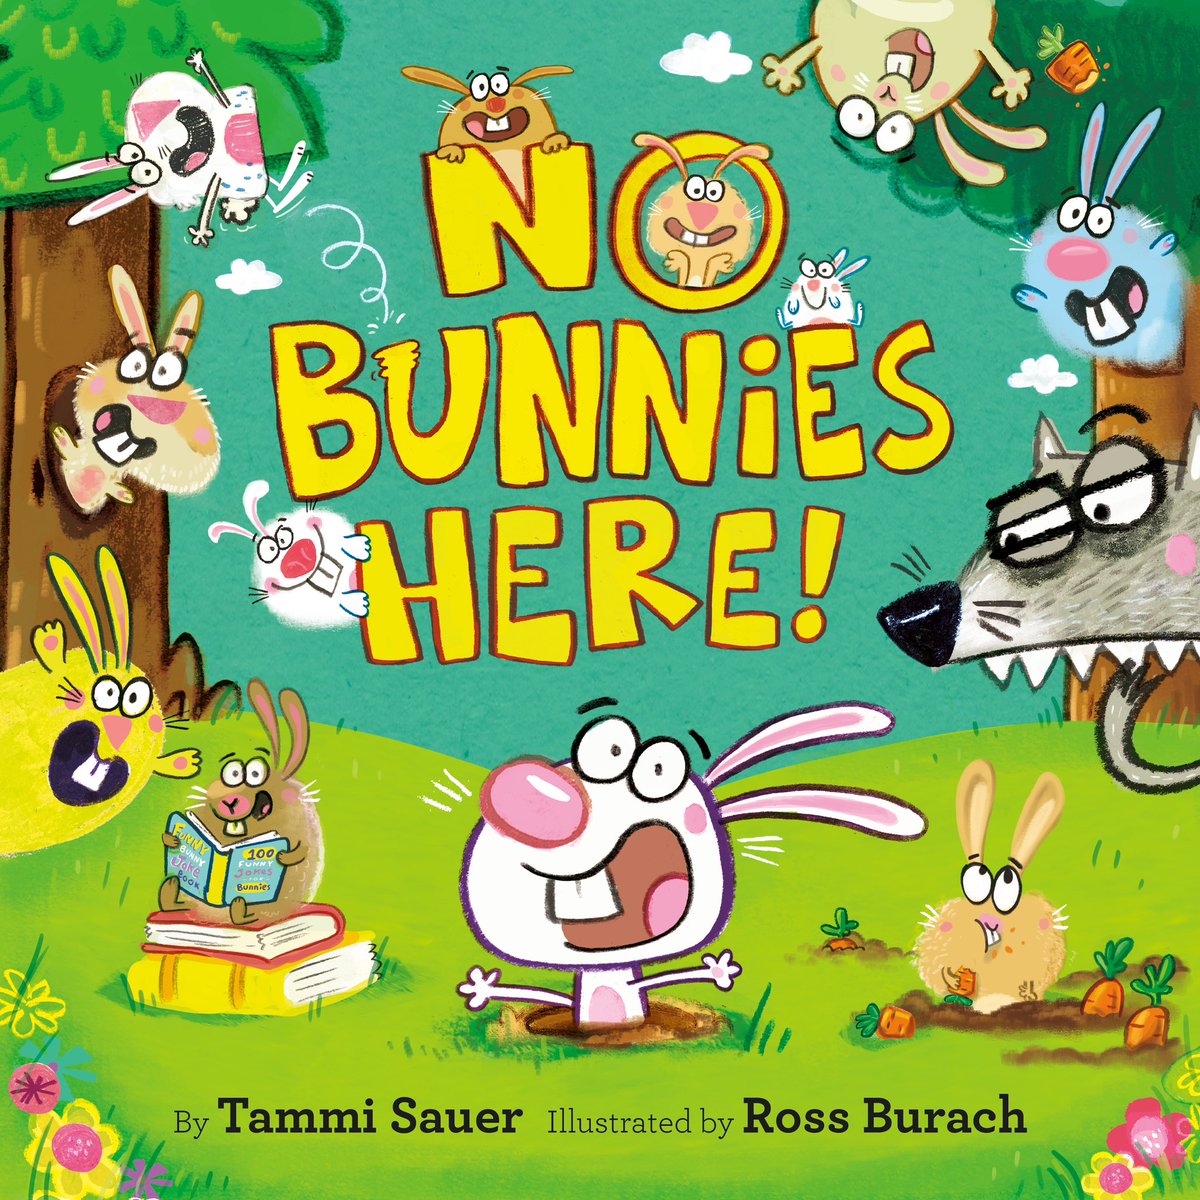 To go along with my book NO BUNNIES HERE!, second graders helped disguise some bunnies. Meet Bob Ross, Ariana Grande, and a bisness* man named Neco. 😂 #rossburach @GoGirlsGoBooks